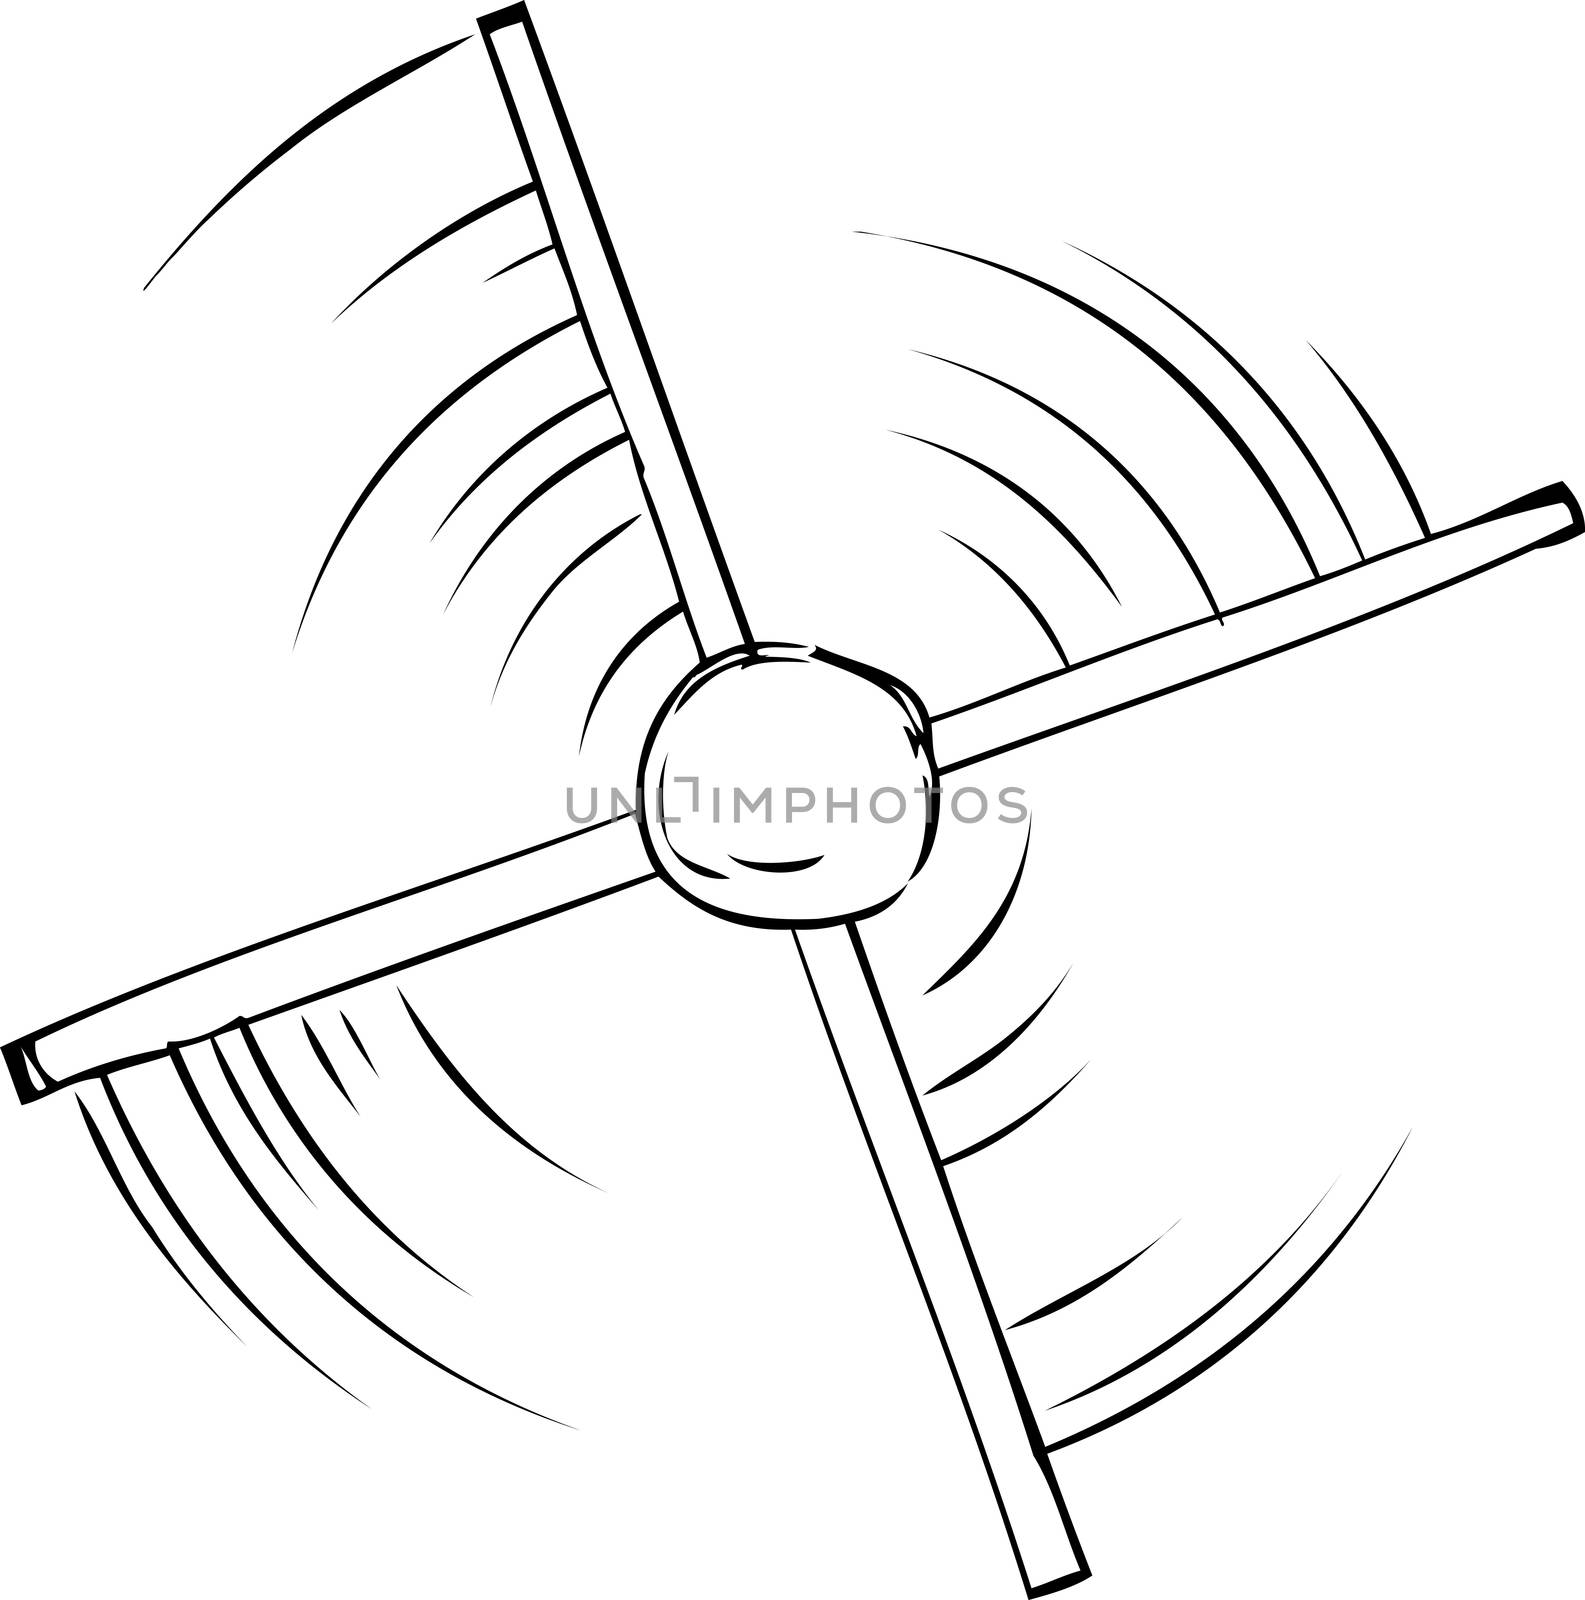 Outline of Propeller Spinning by TheBlackRhino